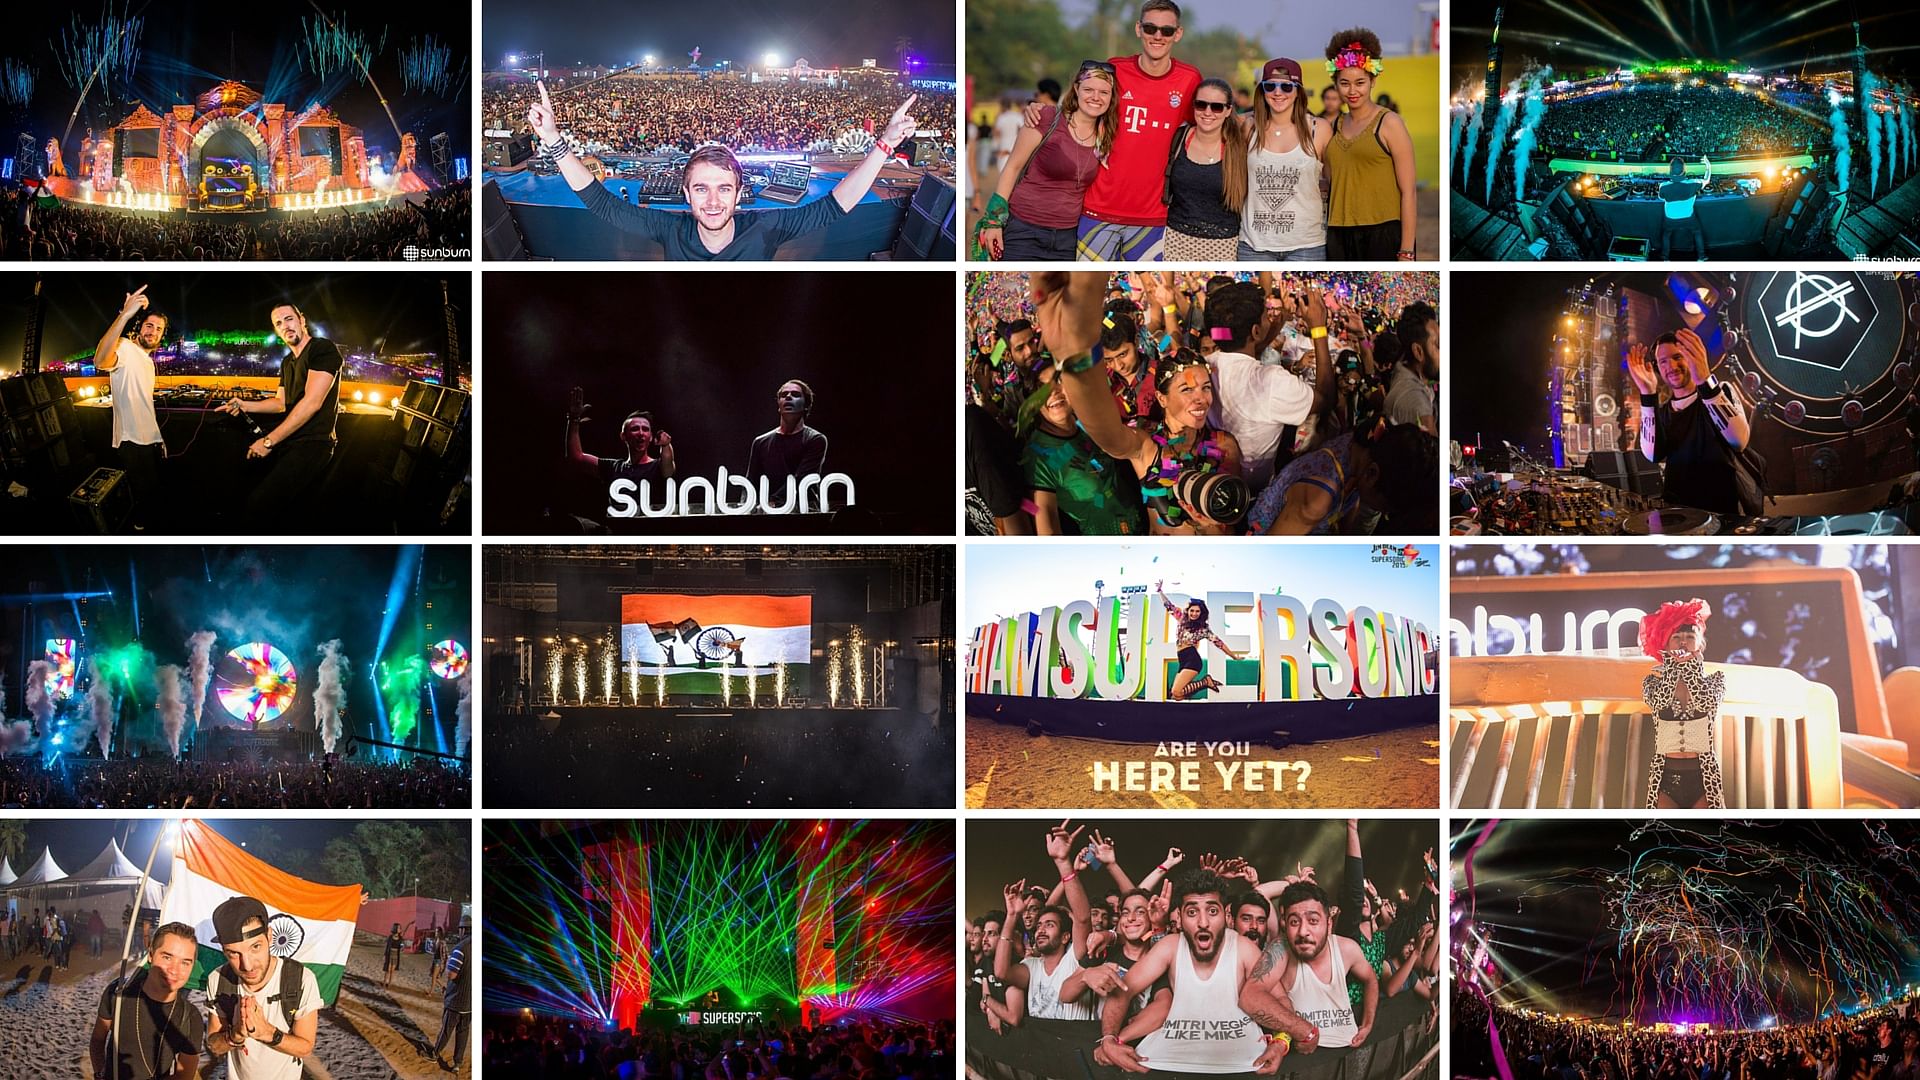 An excerpt of Sunburn and VH1 Supersonic in Goa 2015. (Photo courtesy: <a href="https://www.facebook.com/Vh1Supersonic">VH1 Supersonic</a> and <a href="https://www.facebook.com/SunburnFestival">Sunburn</a>/Altered by <b>The Quint</b>)